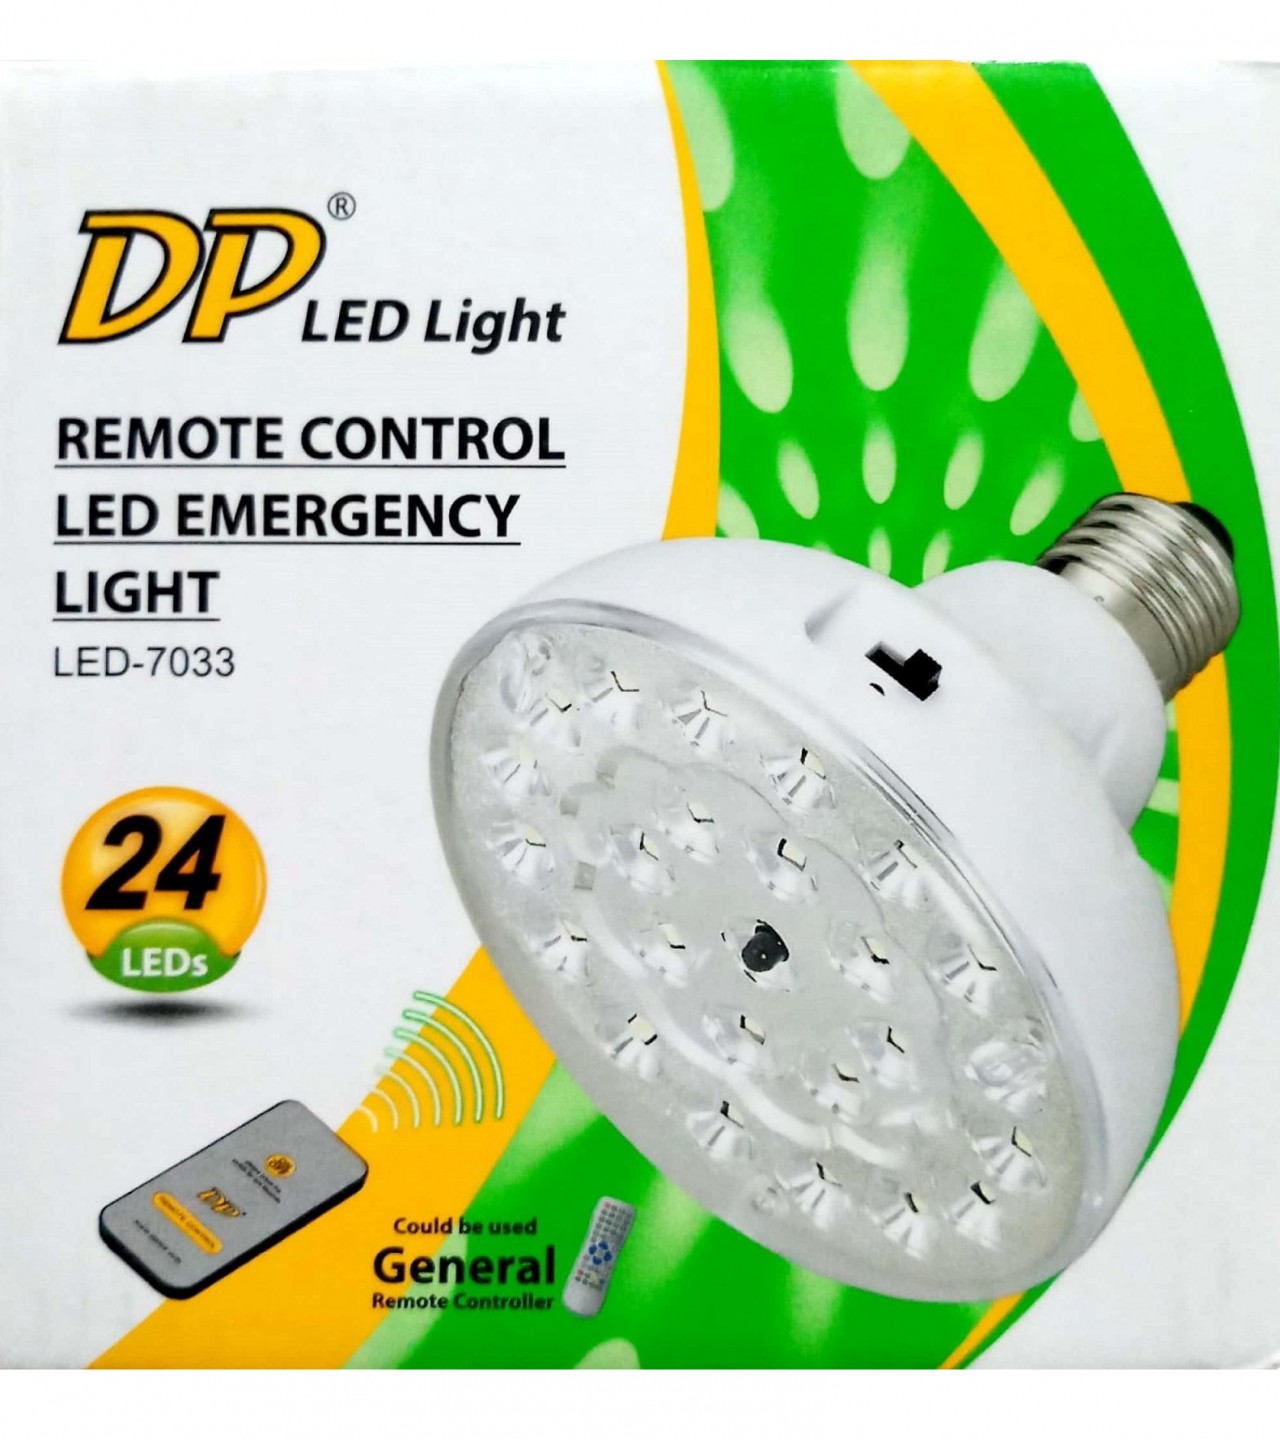 DP-7033 Emcergency Light with Remote Control